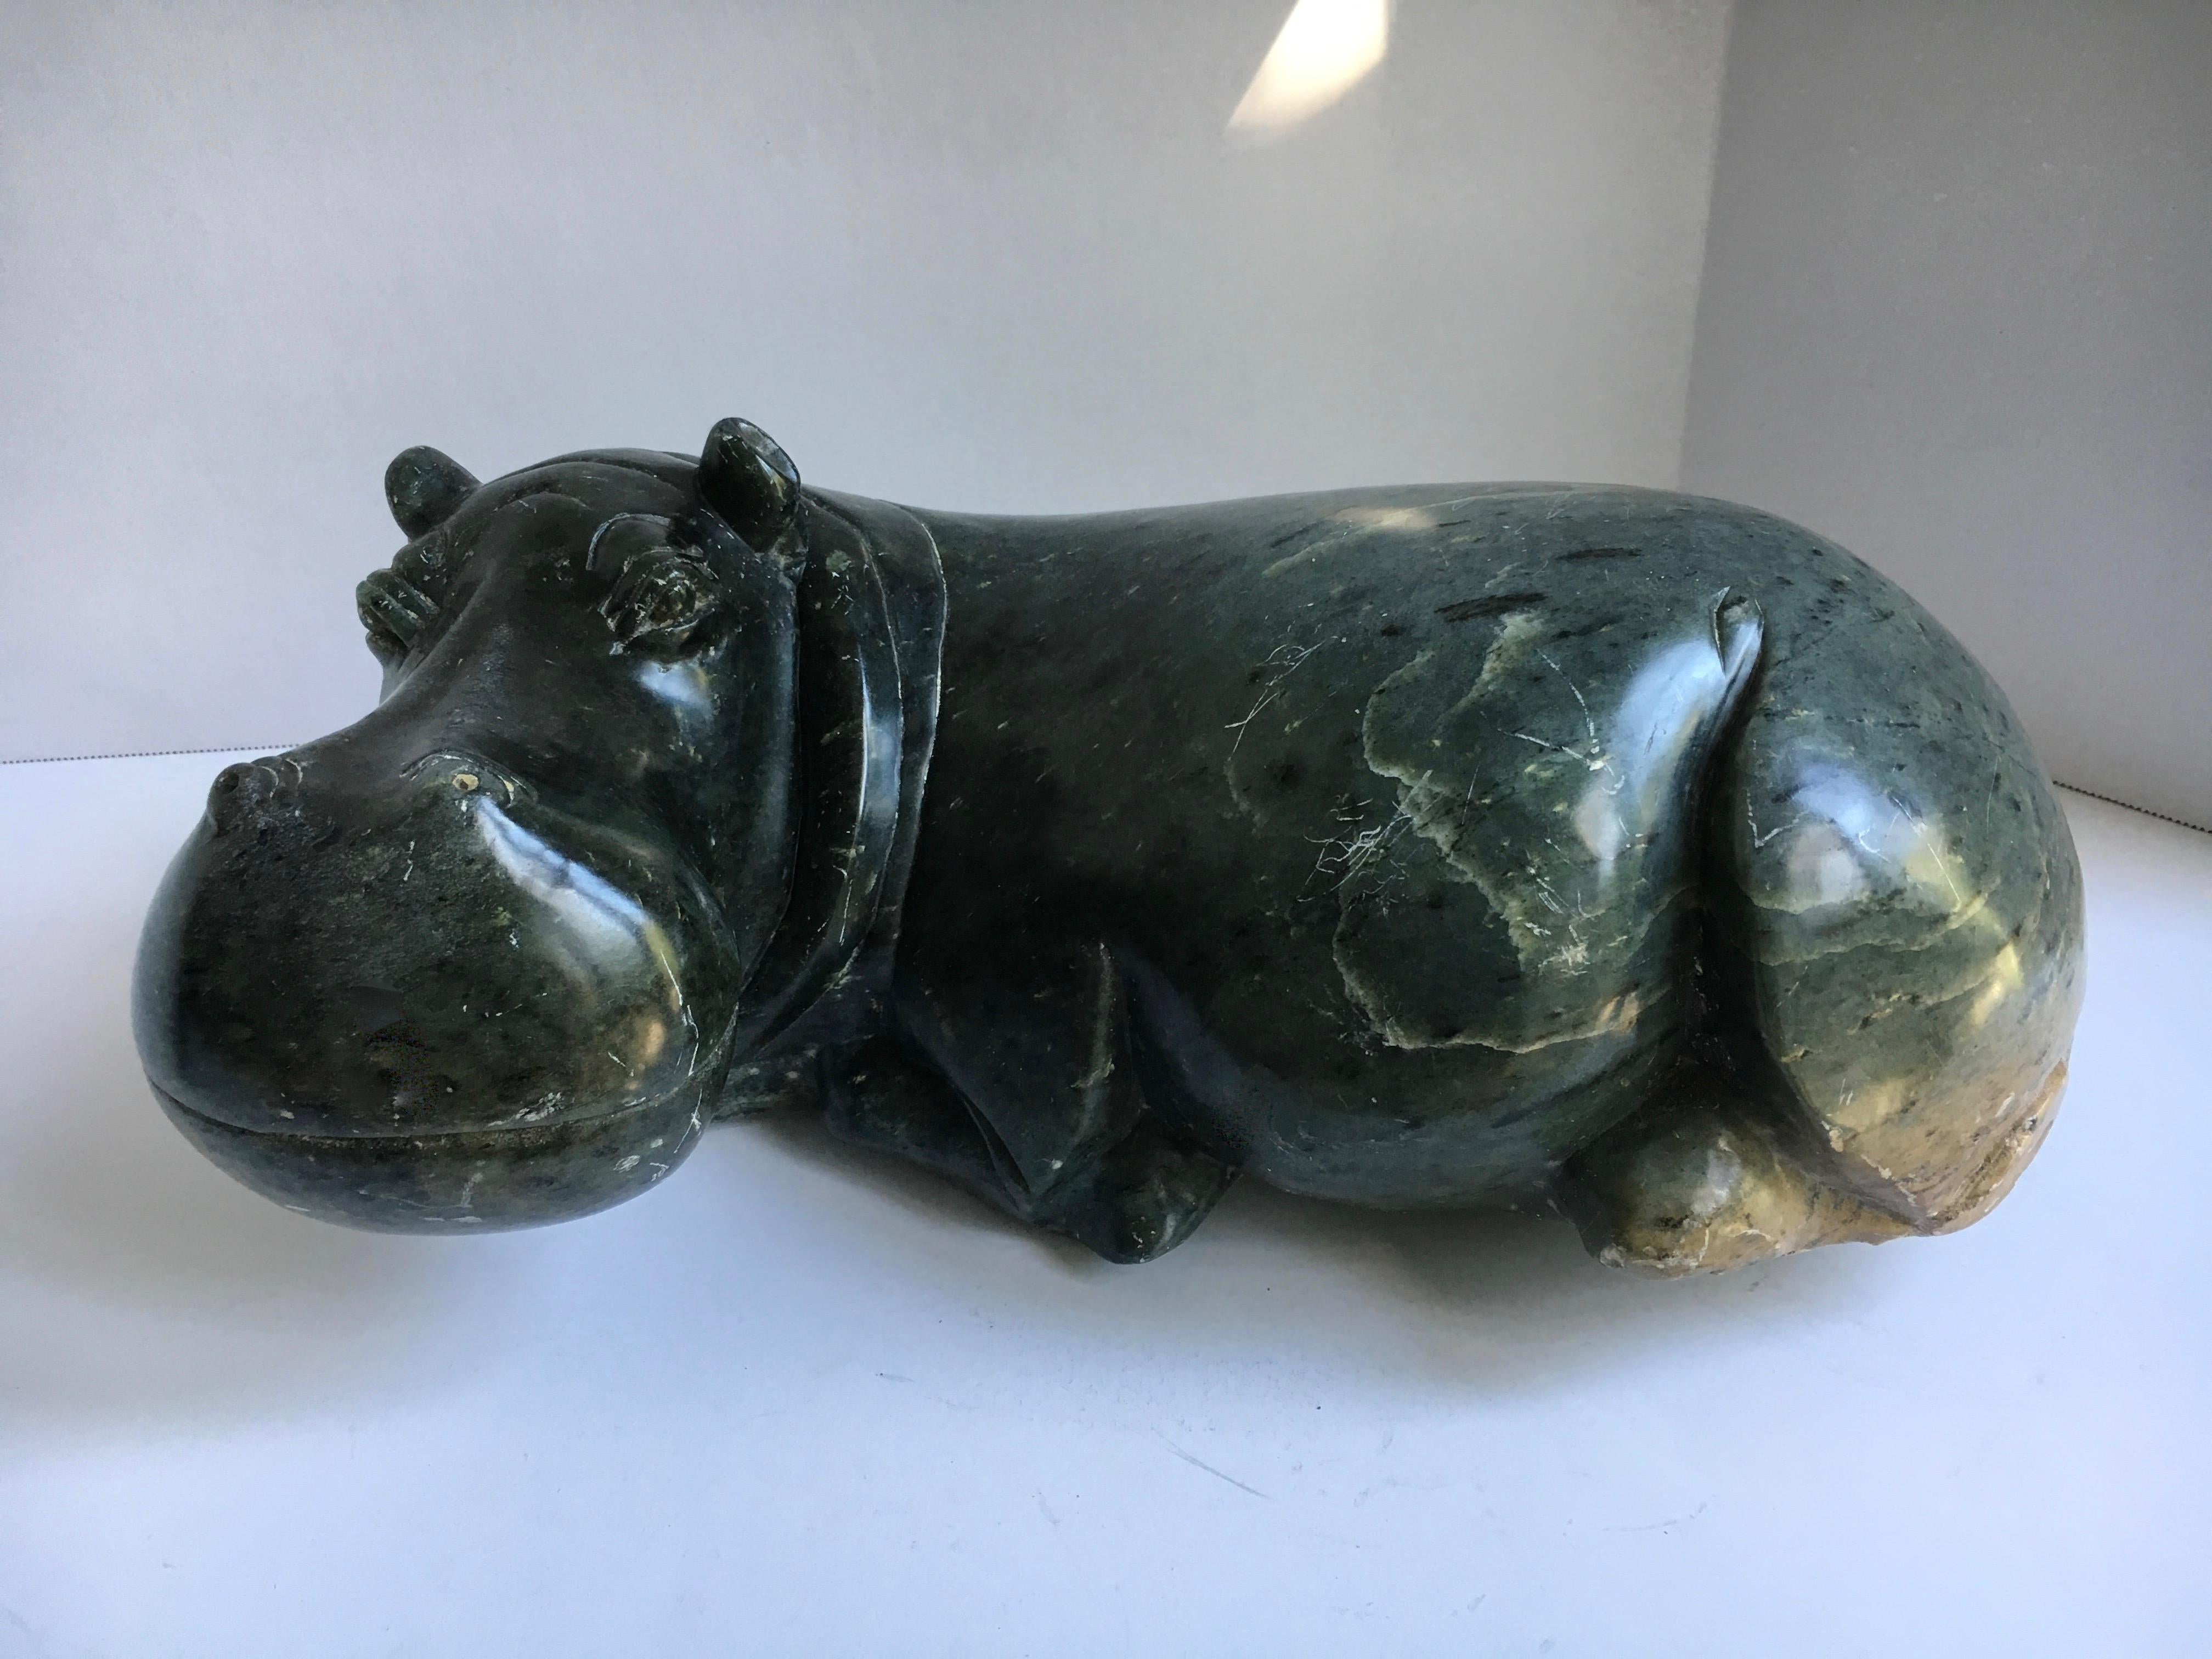 A very handsome carved sculpture of. Hippo made from Soapstone or Jadeite. The very large and heavy piece is a wonderful representation and ready for any shelf or living space.